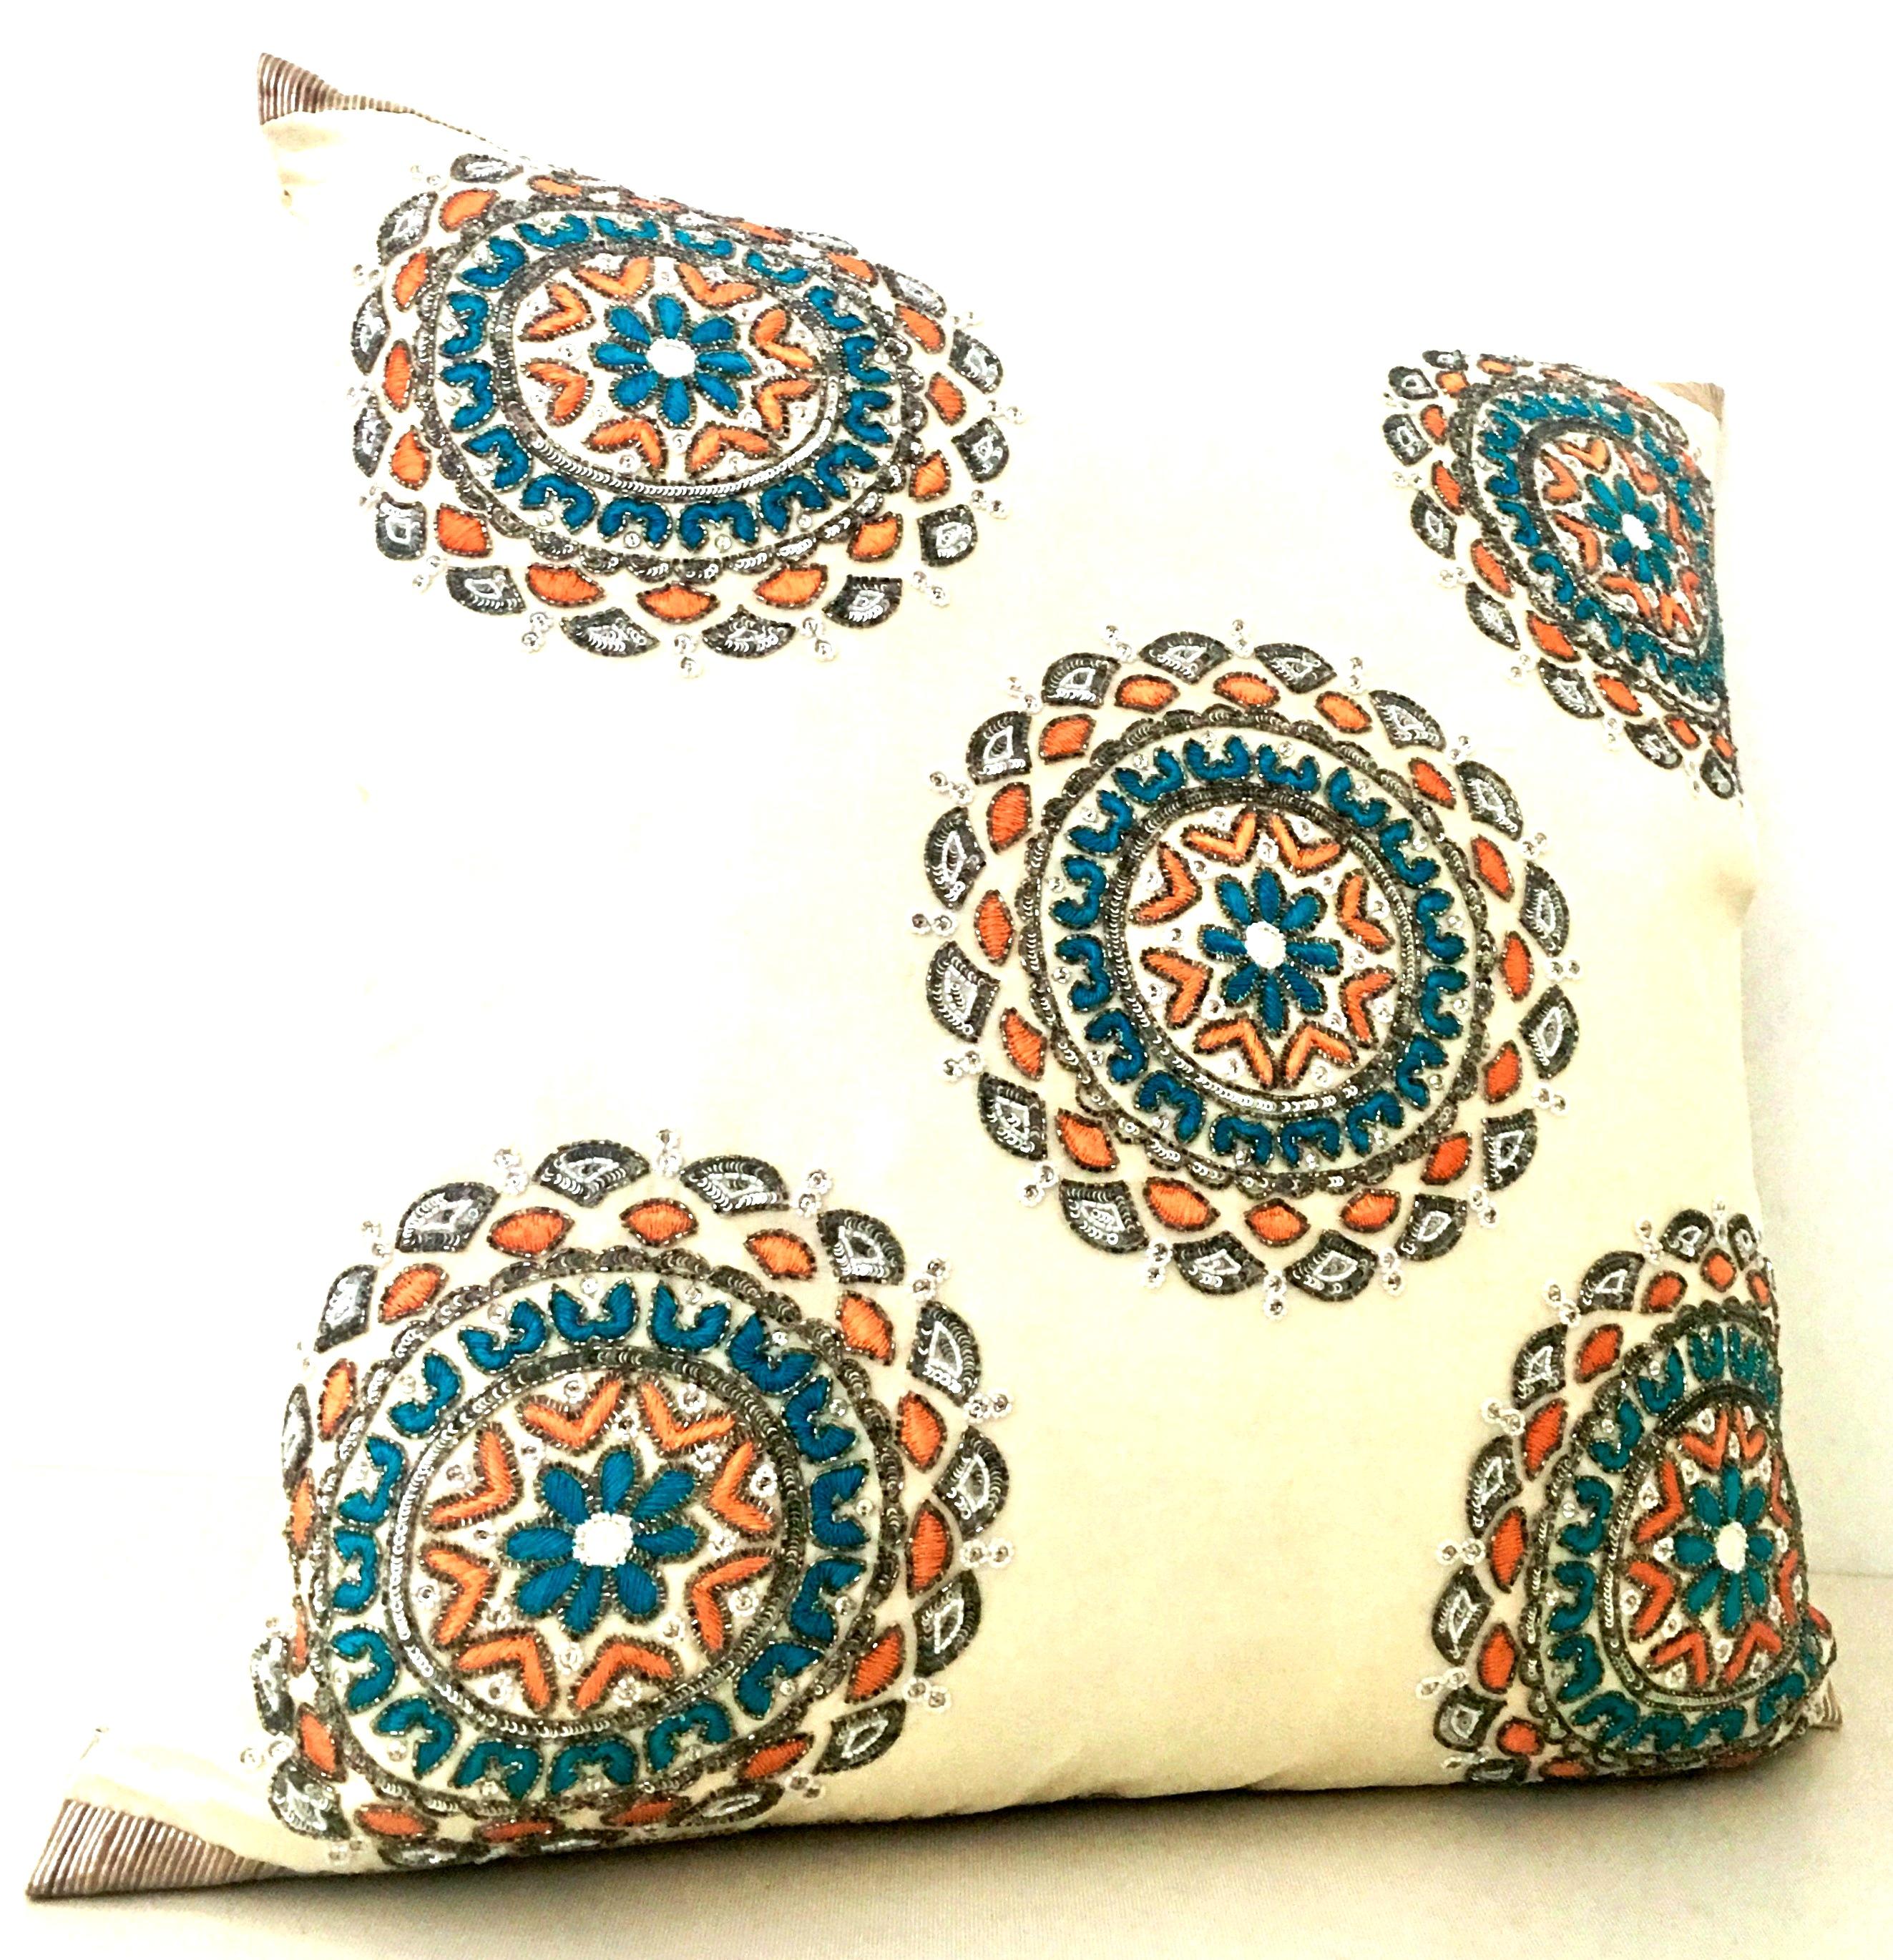 21st Century & New Fine ivory silk embroidered crystal and sequin embellished down pillow by, Sivaana. Features a Morocco motif of vibrant orange, turquoise, gold and metallic silver thread detail. Includes a cotton covered down/feather combination